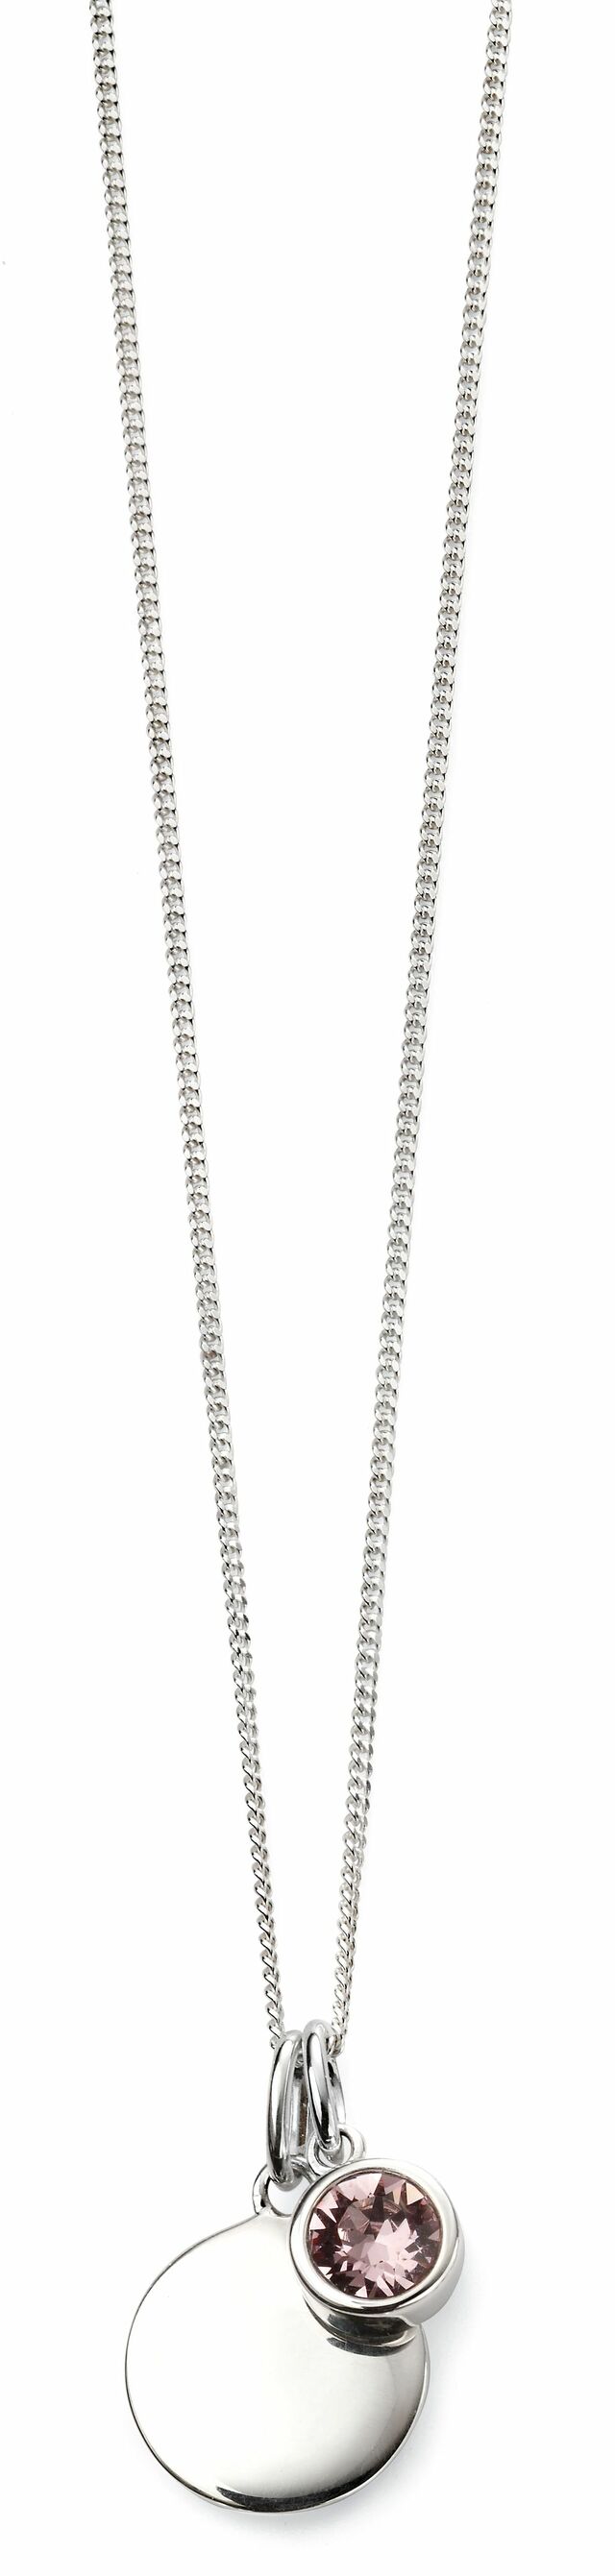 June Silver and crystal Birthstone Necklace - NB1012 - Hallmark Jewellers Formby & The Jewellers Bench Widnes